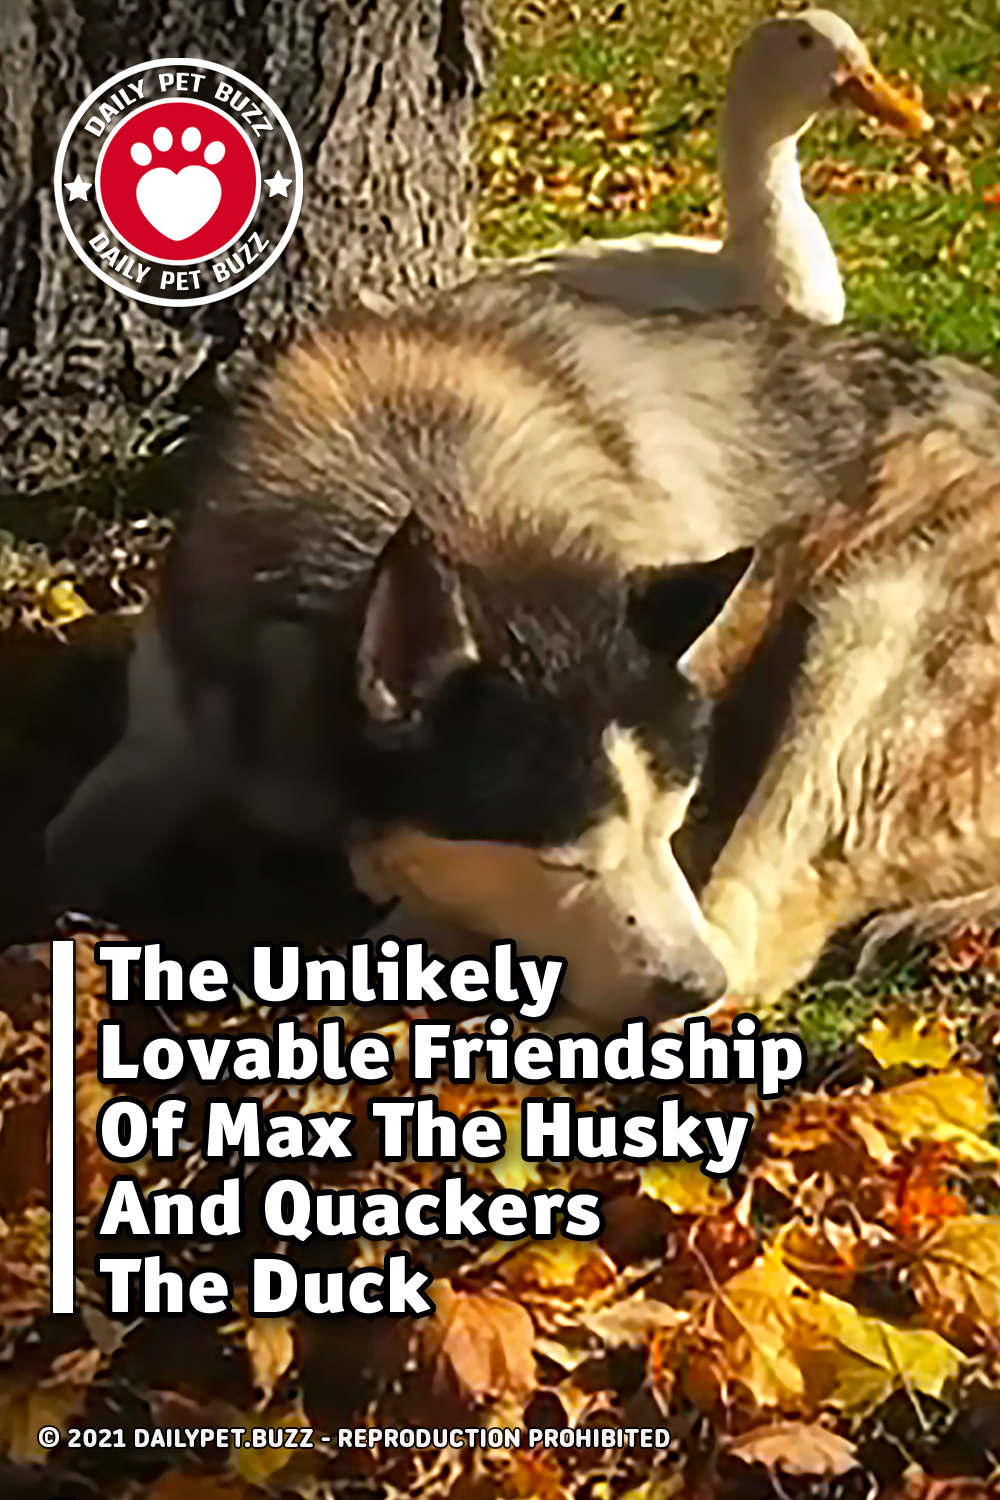 The Unlikely Lovable Friendship Of Max The Husky And Quackers The Duck